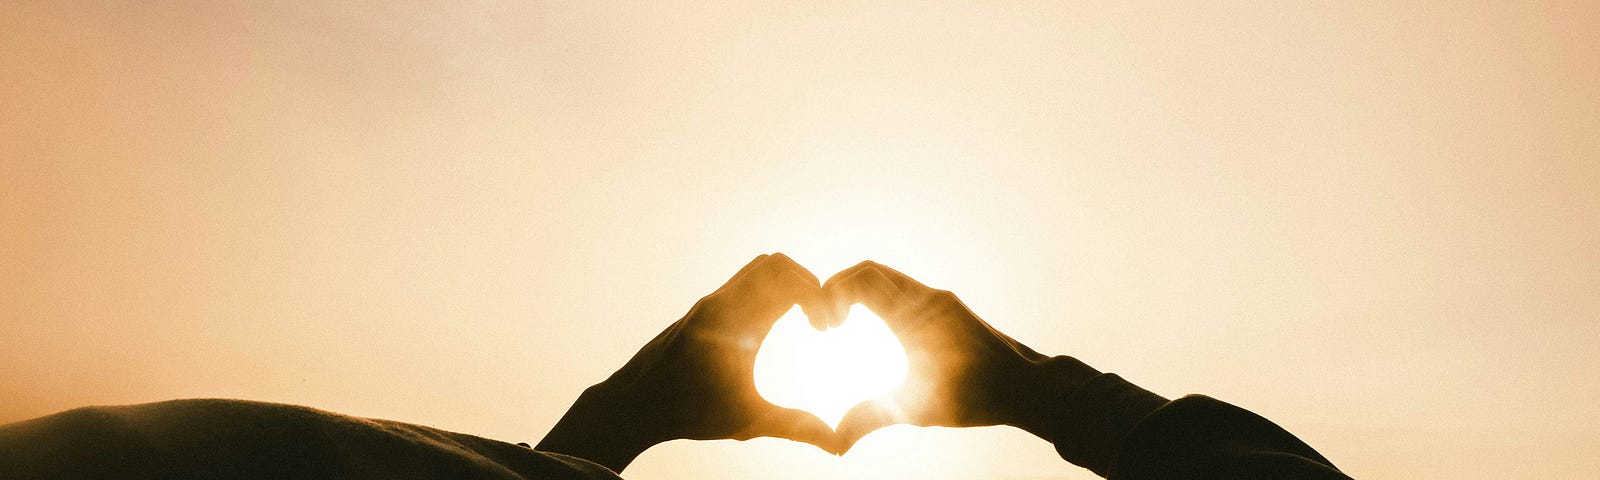 Hands forming a heart shape with sun glow in the background.